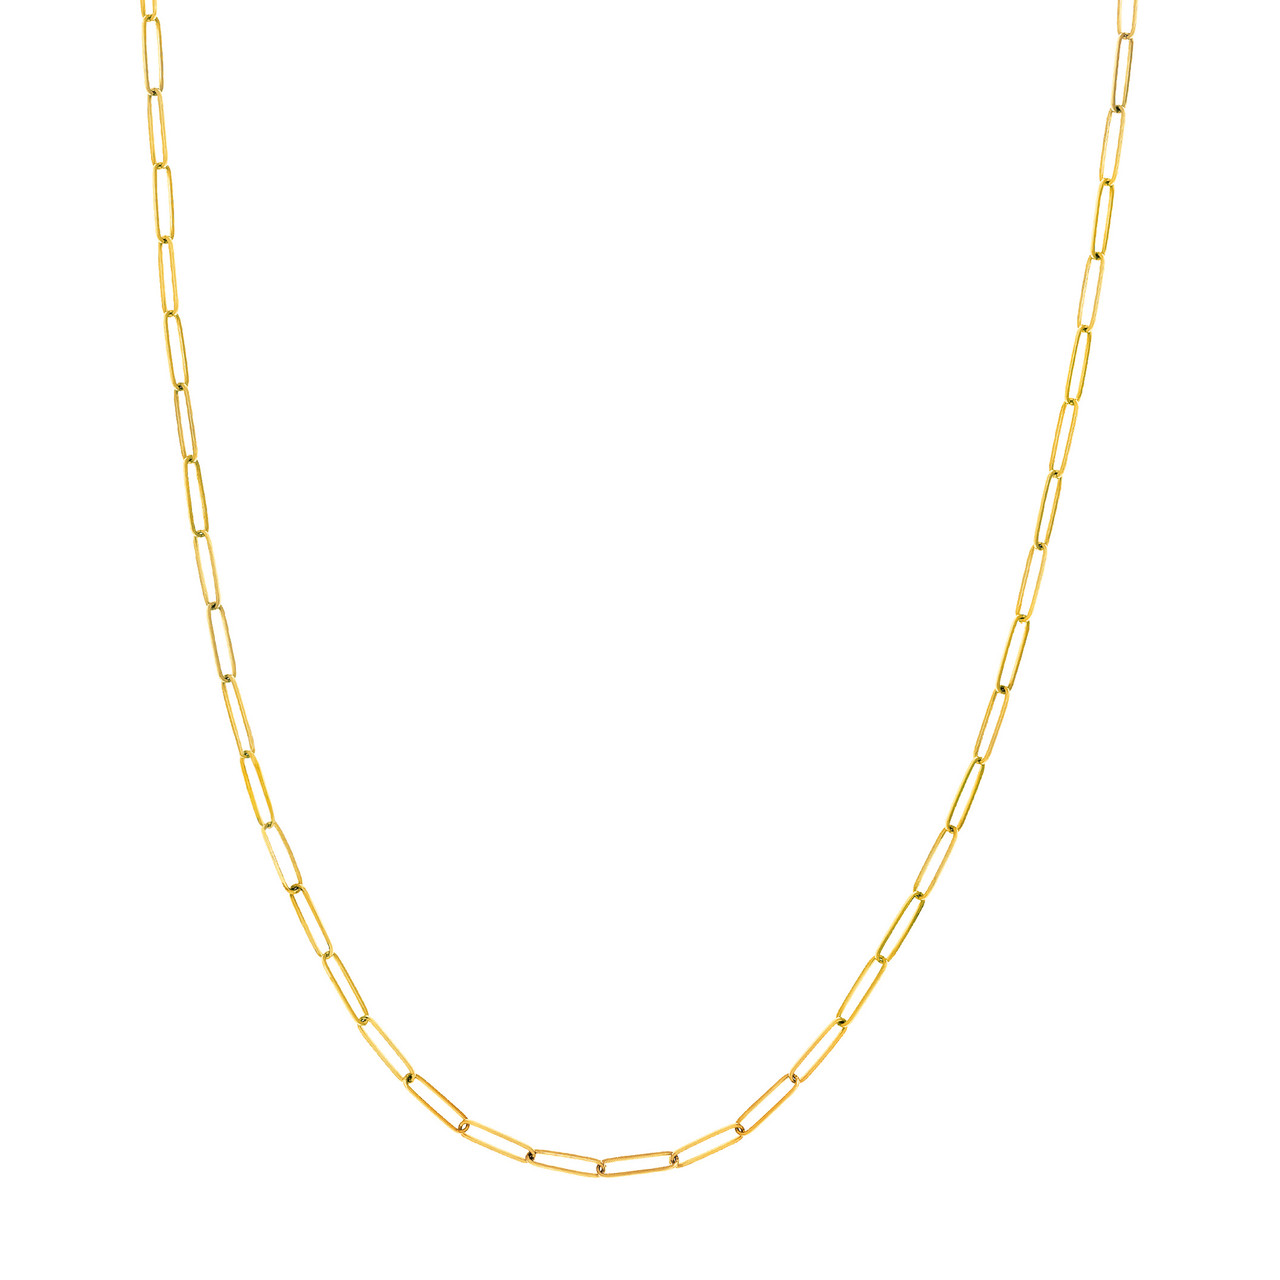 Yellow Gold Elongated Paperclip Chain Necklace 2.6mm l 18 inches